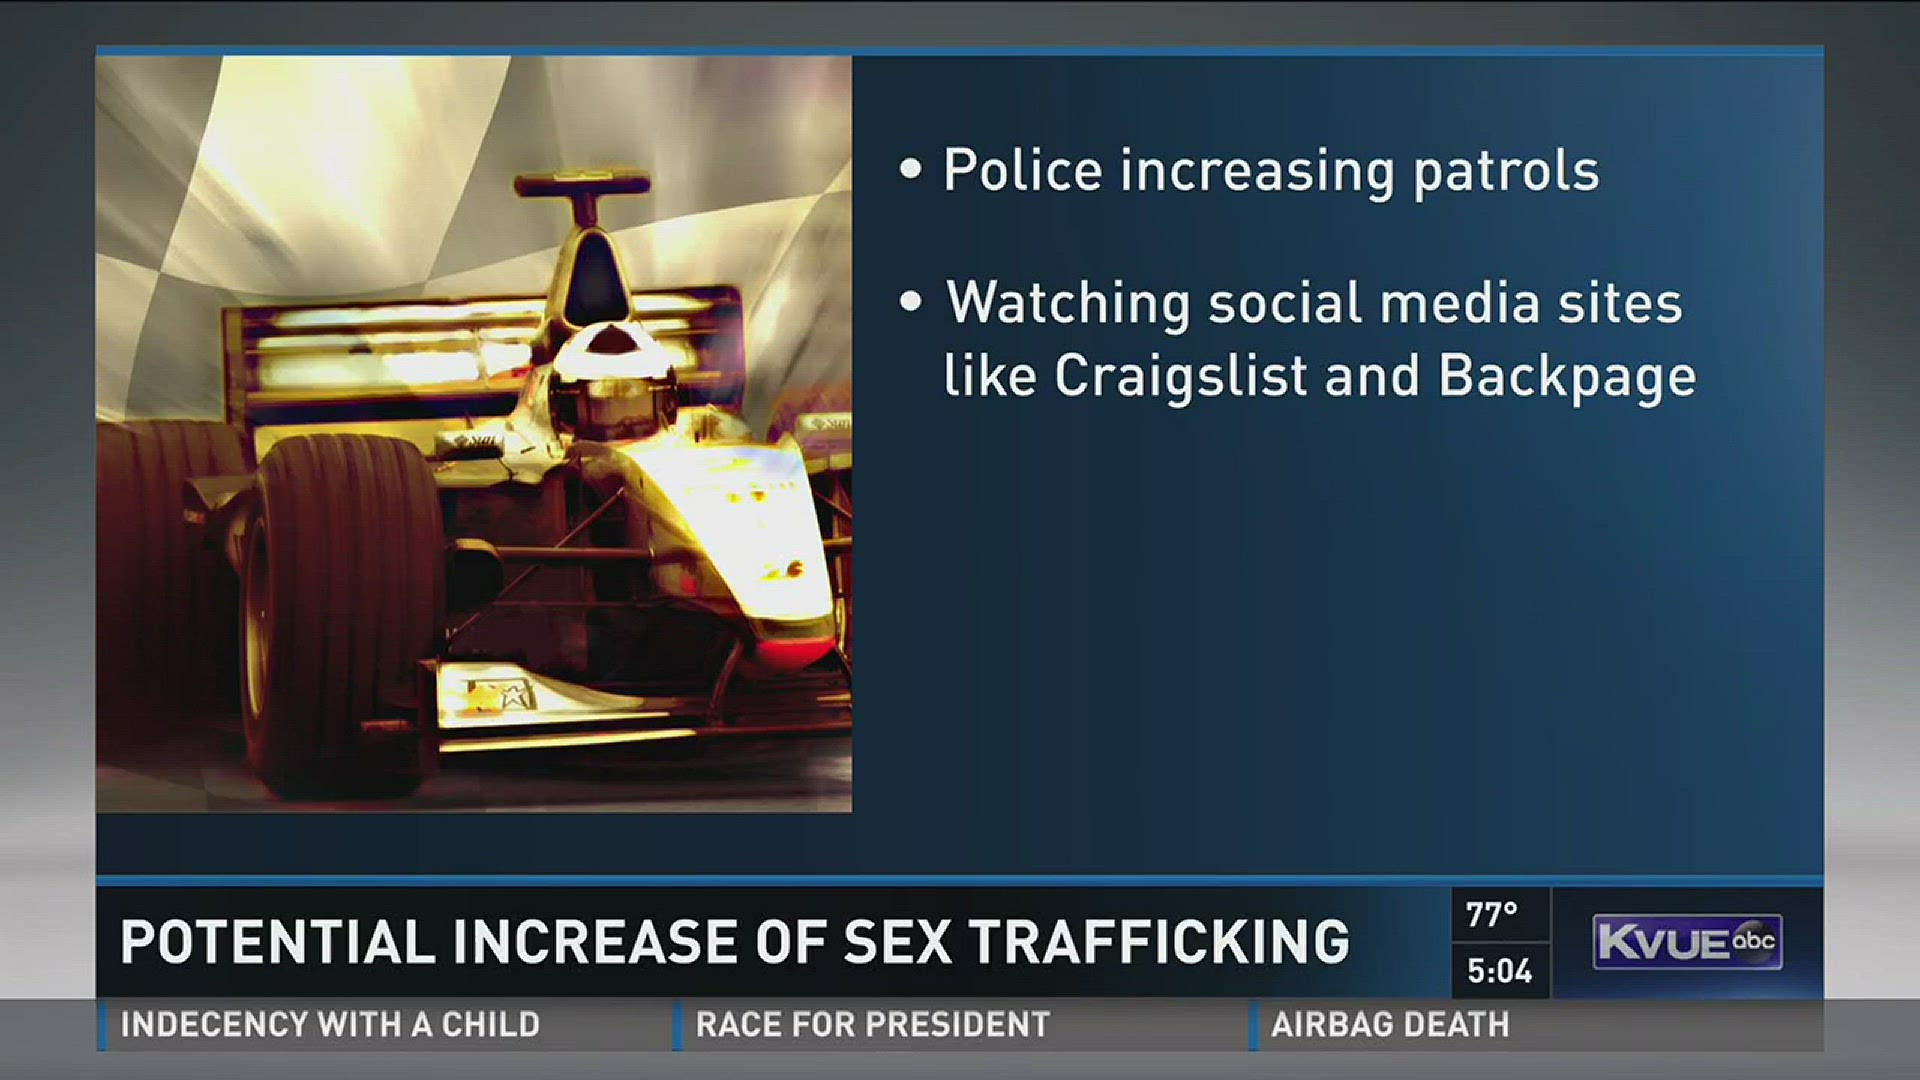 Law enforcement preparing for increase in sex trafficking kvue